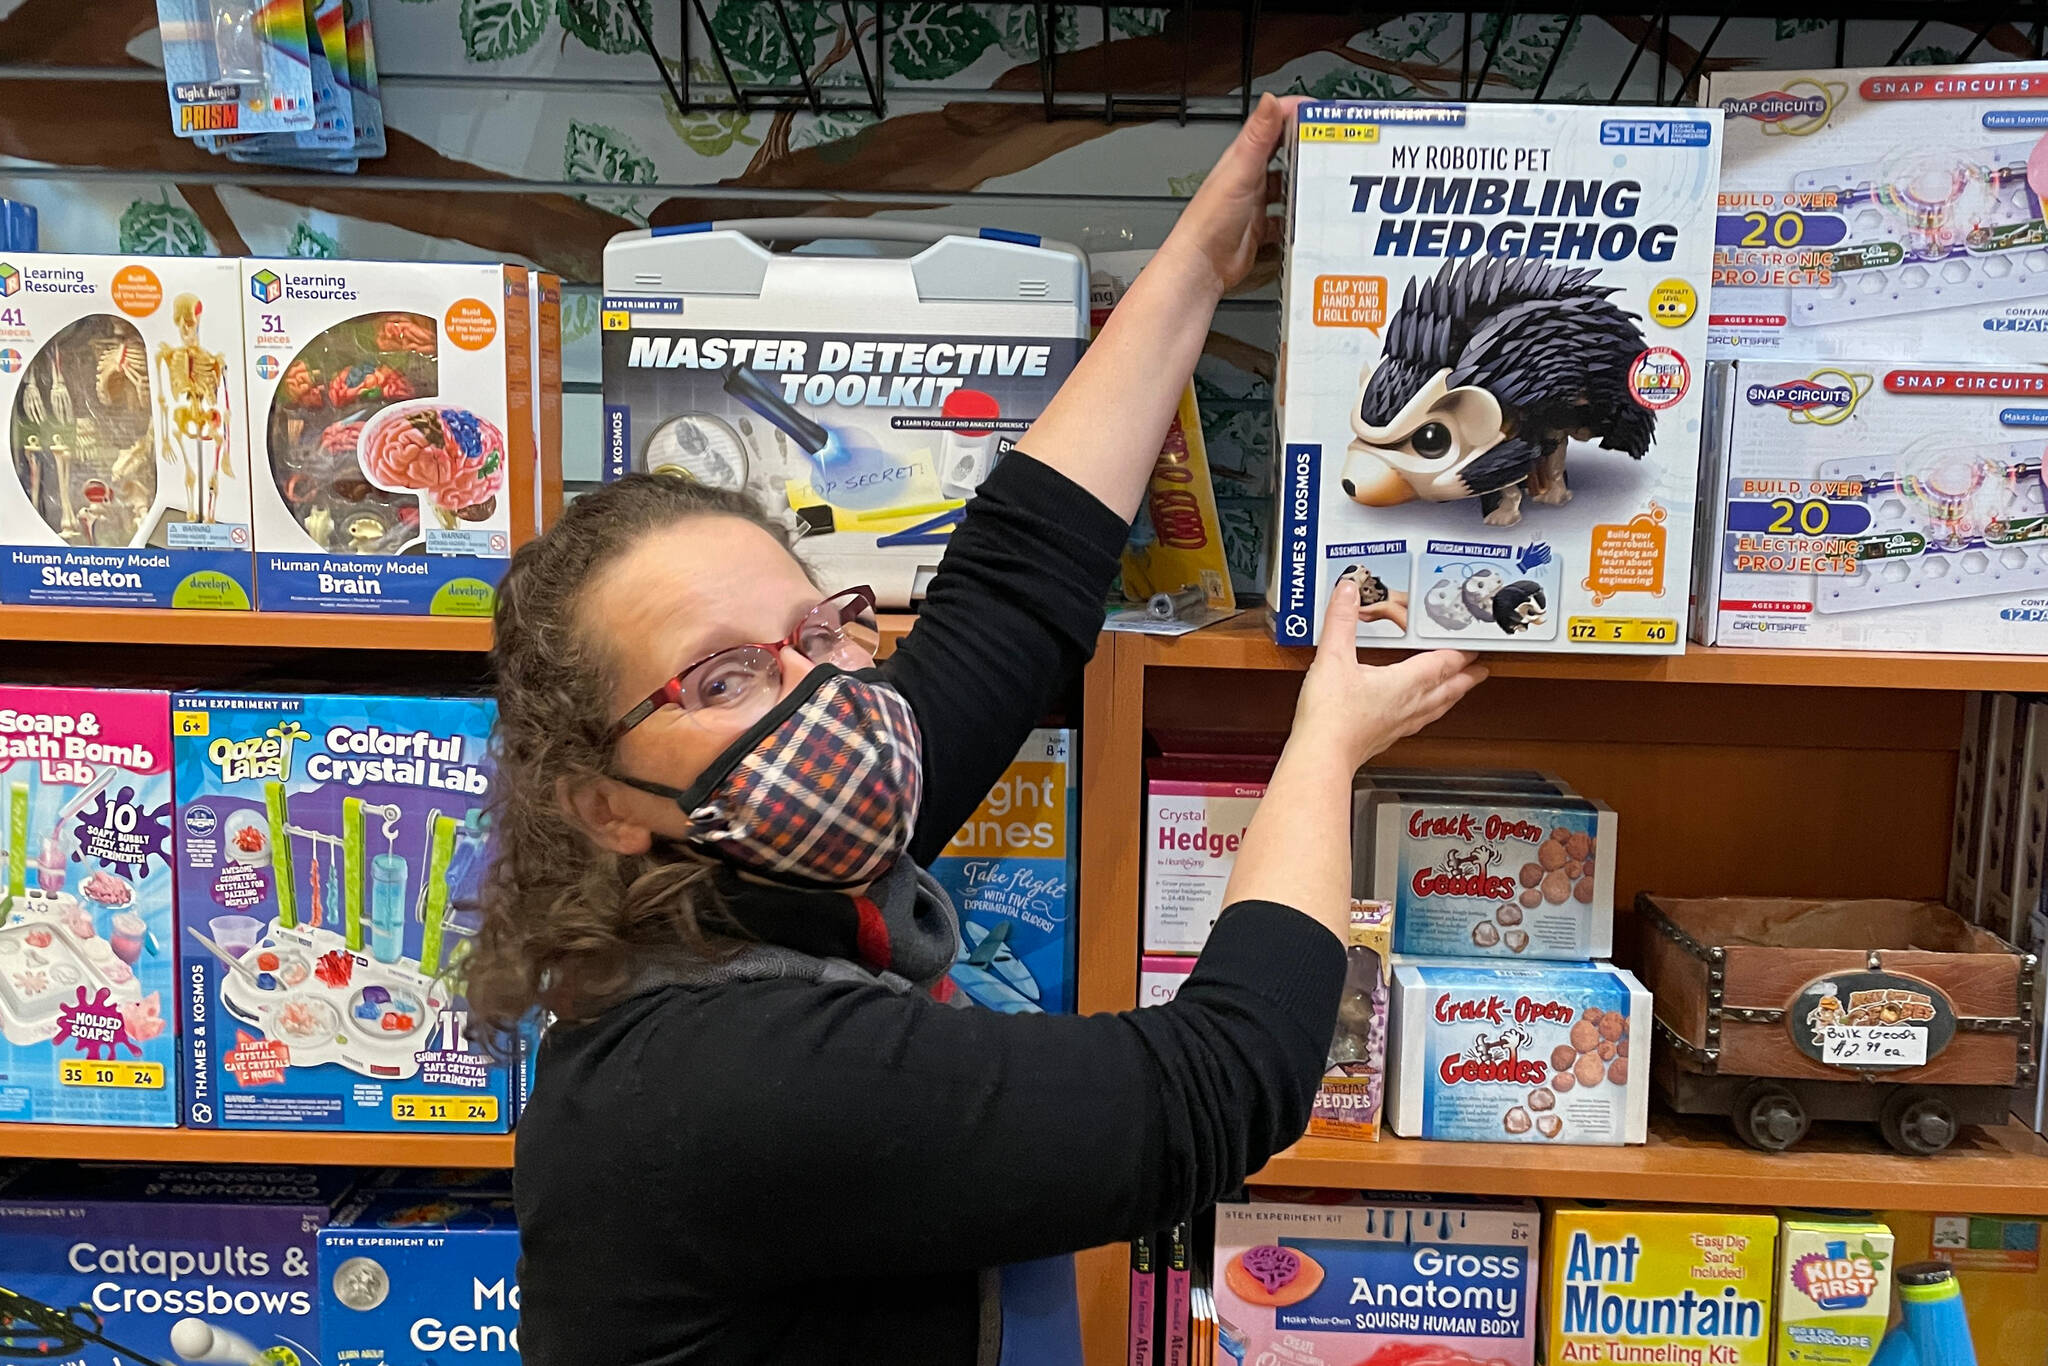 Juneau’s Imagination Station owner Alicia Smith highlights one of their best-selling items at the store this holiday, a robotic hedgehog. (Michael S. Lockett / Juneau Empire)